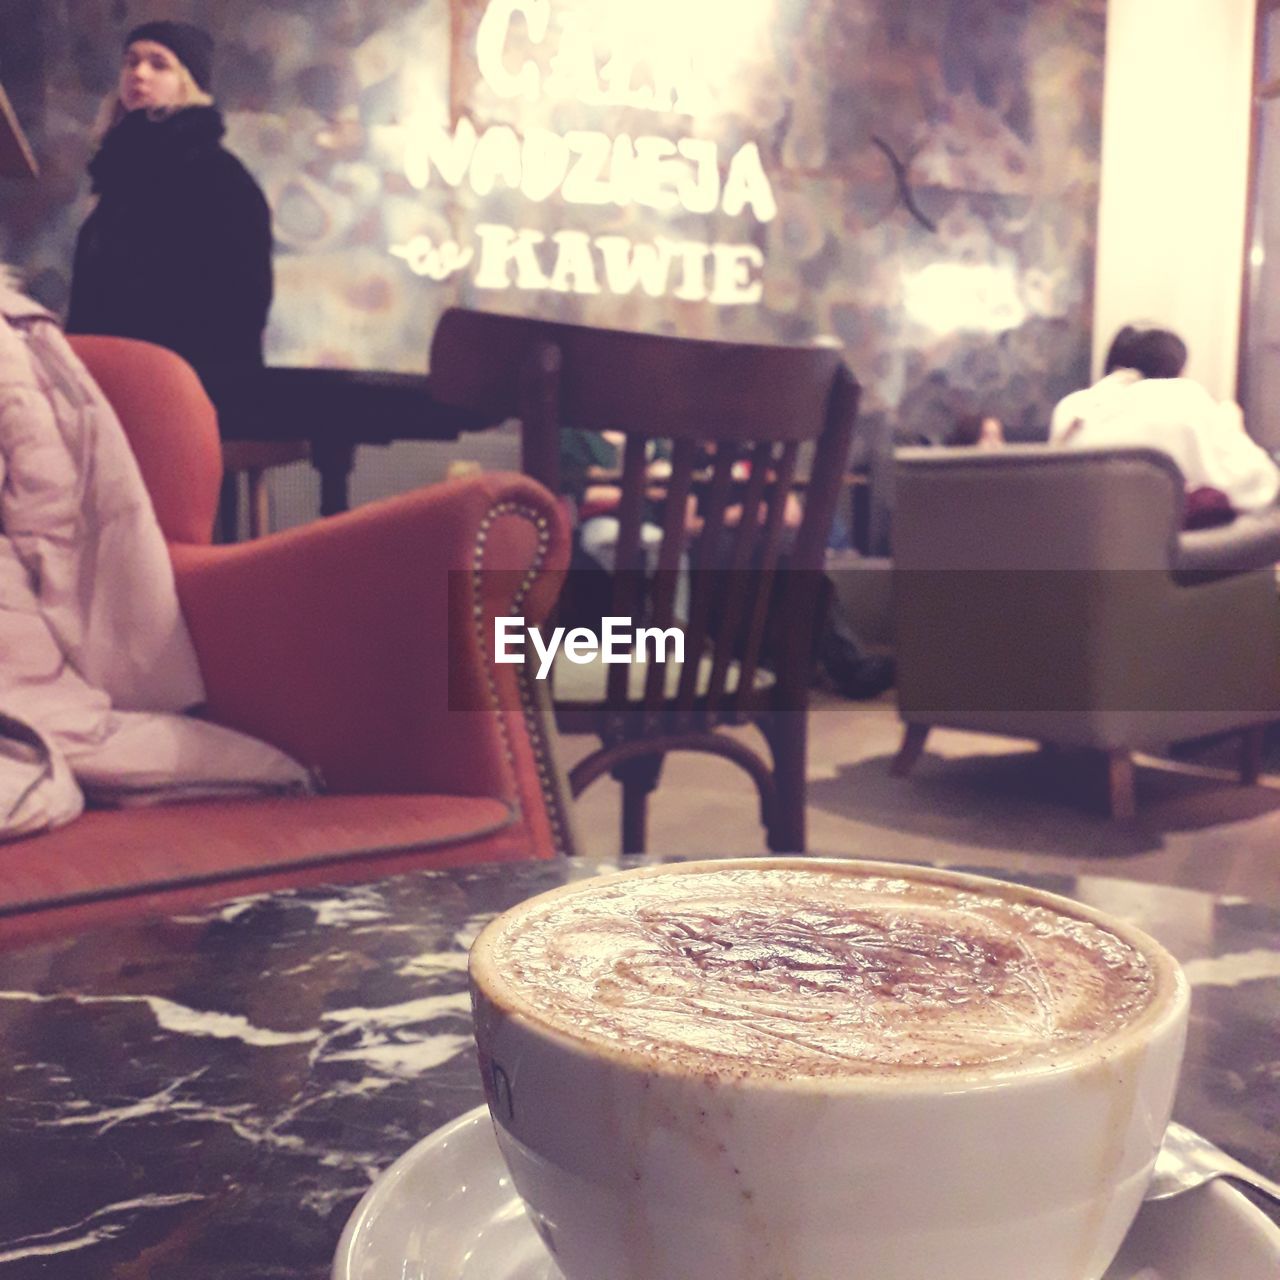 food and drink, drink, coffee, refreshment, cafe, table, coffeehouse, coffee cup, cup, mug, hot drink, indoors, restaurant, business, relaxation, adult, seat, chair, food, furniture, cappuccino, sitting, coffee shop, lifestyles, women, frothy drink, focus on foreground